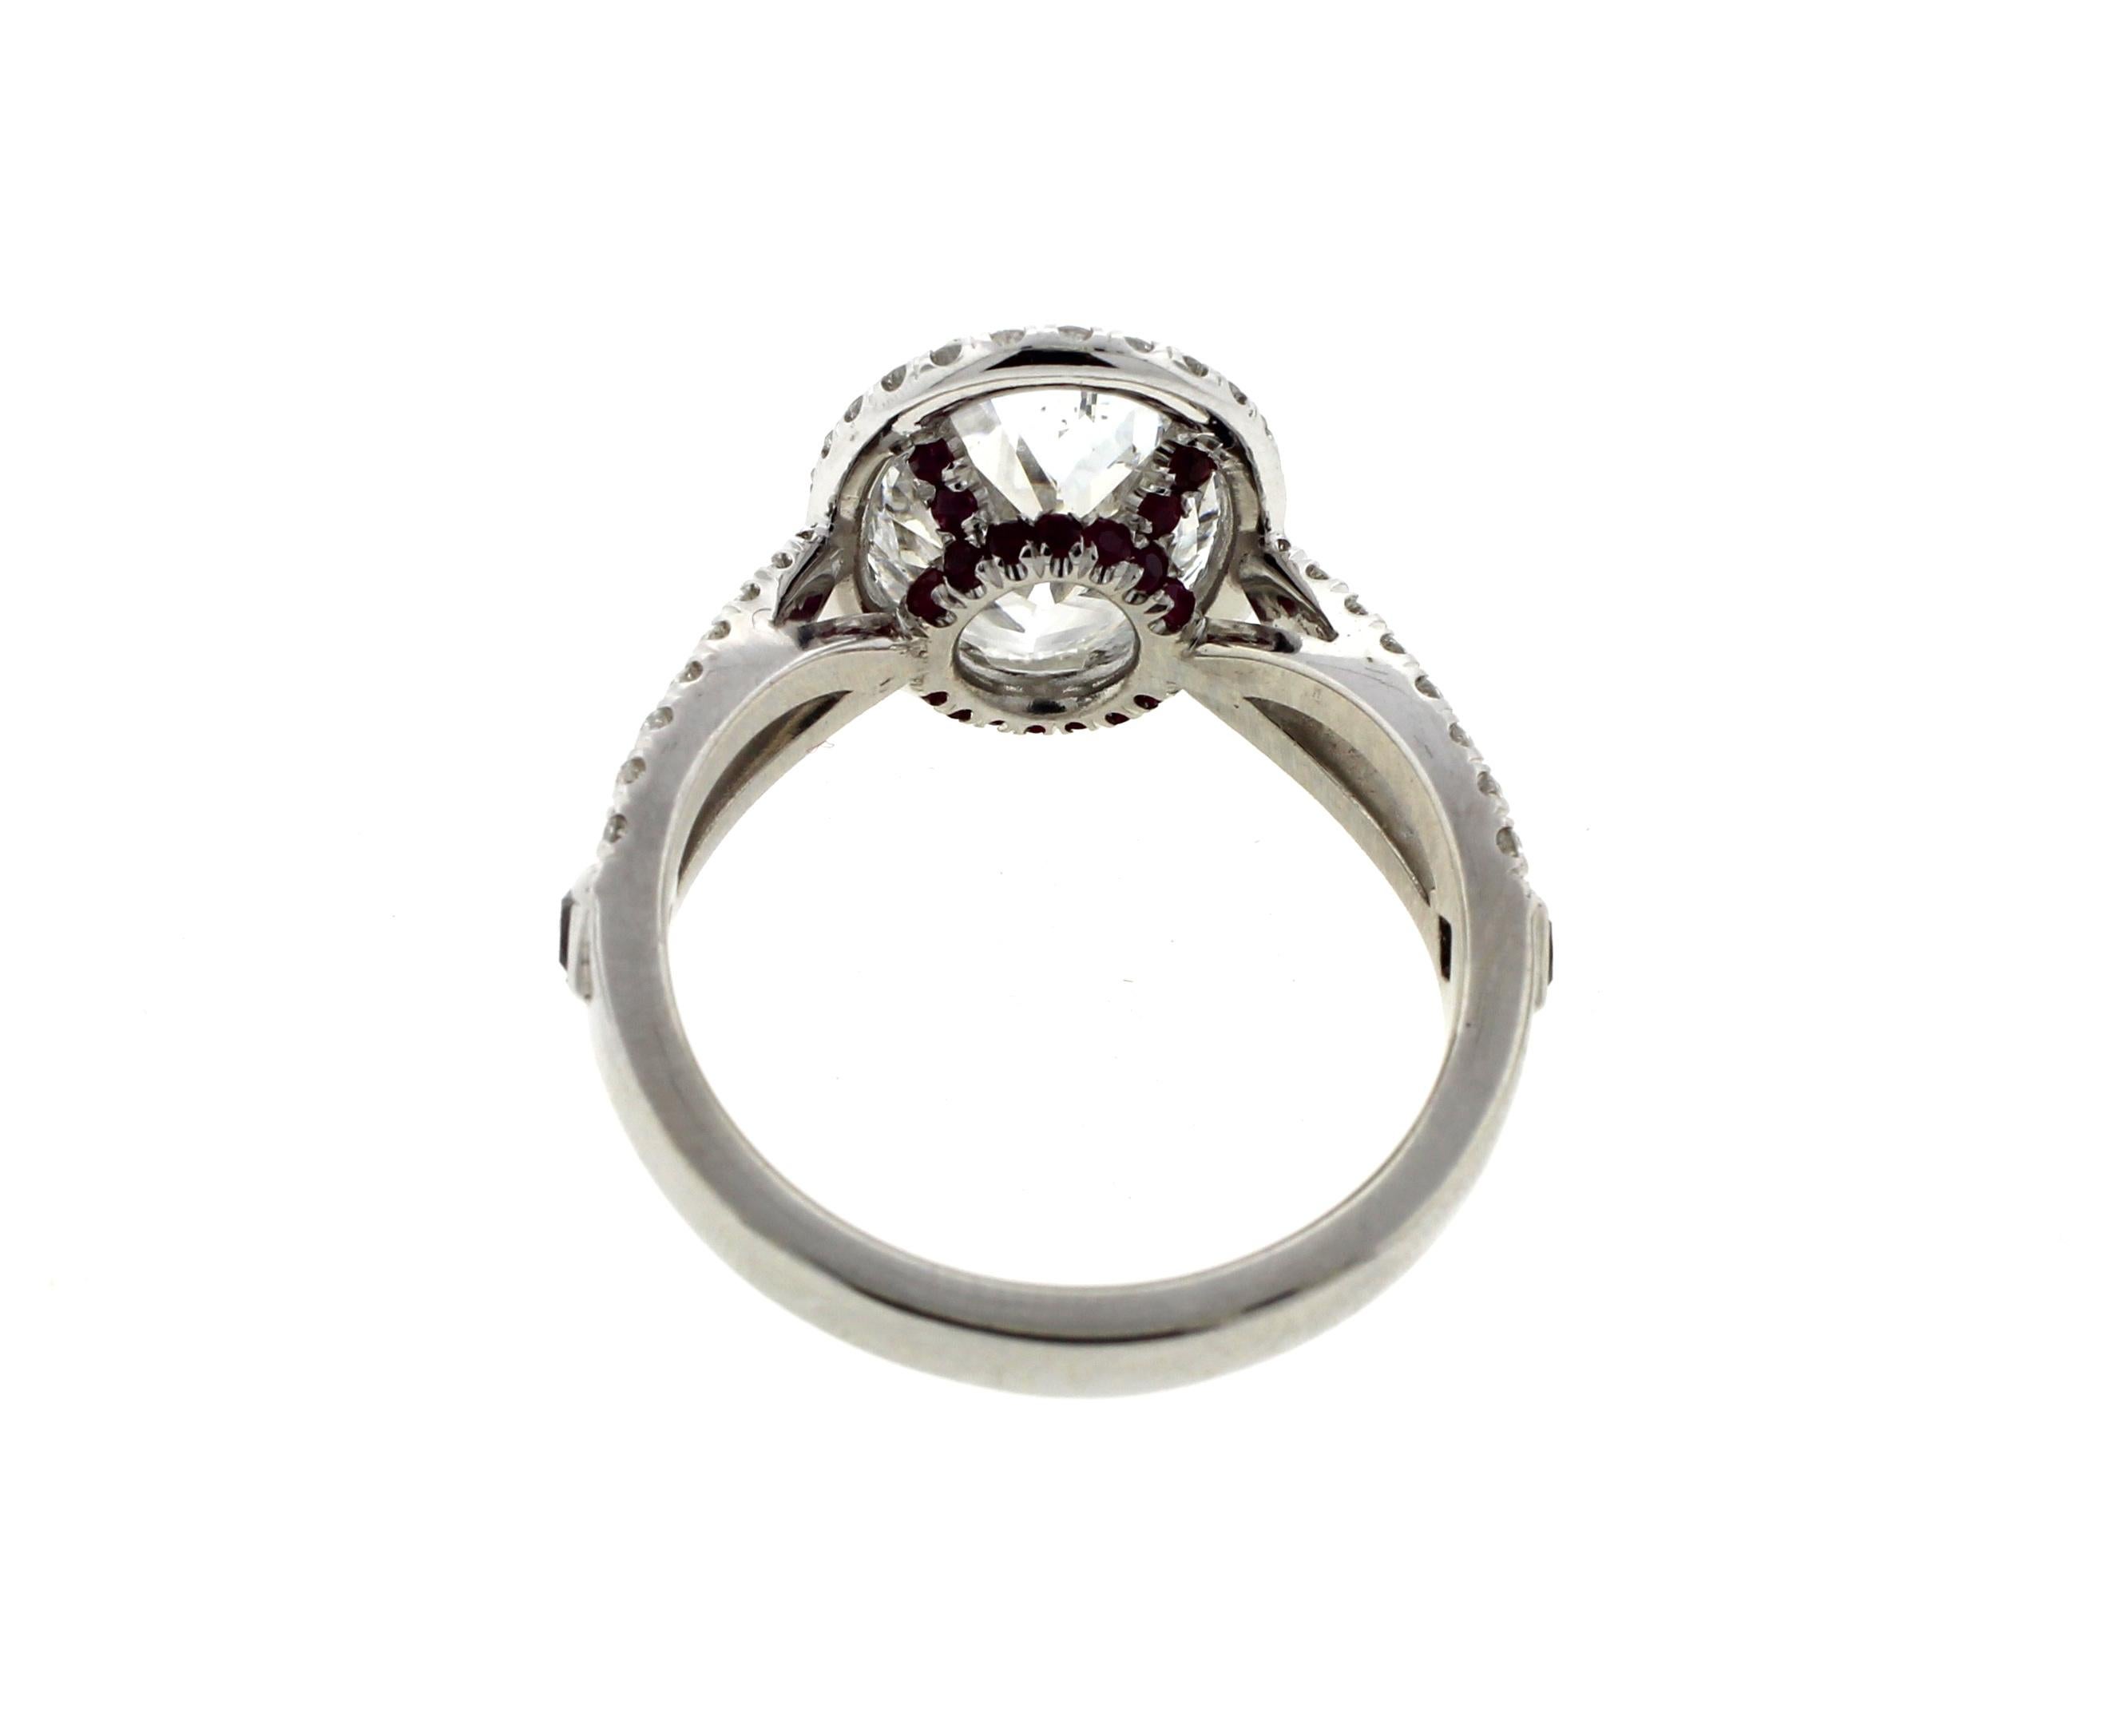 3 carat oval solitaire engagement ring